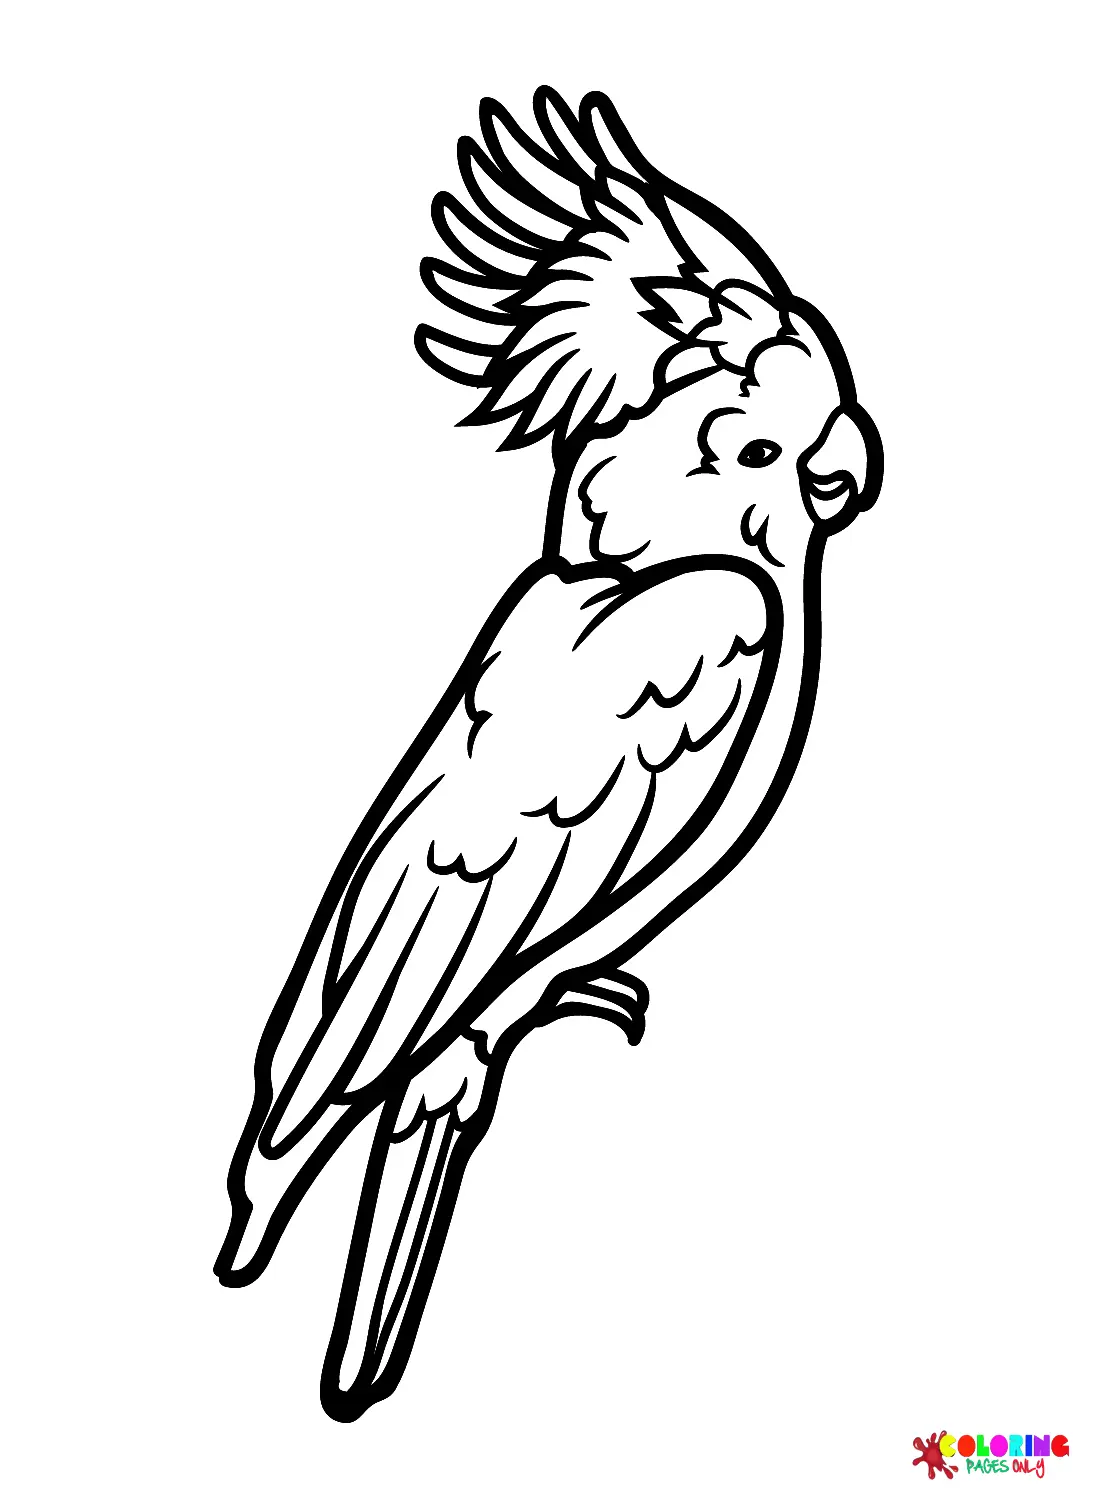 Cockatoo Coloring Pages